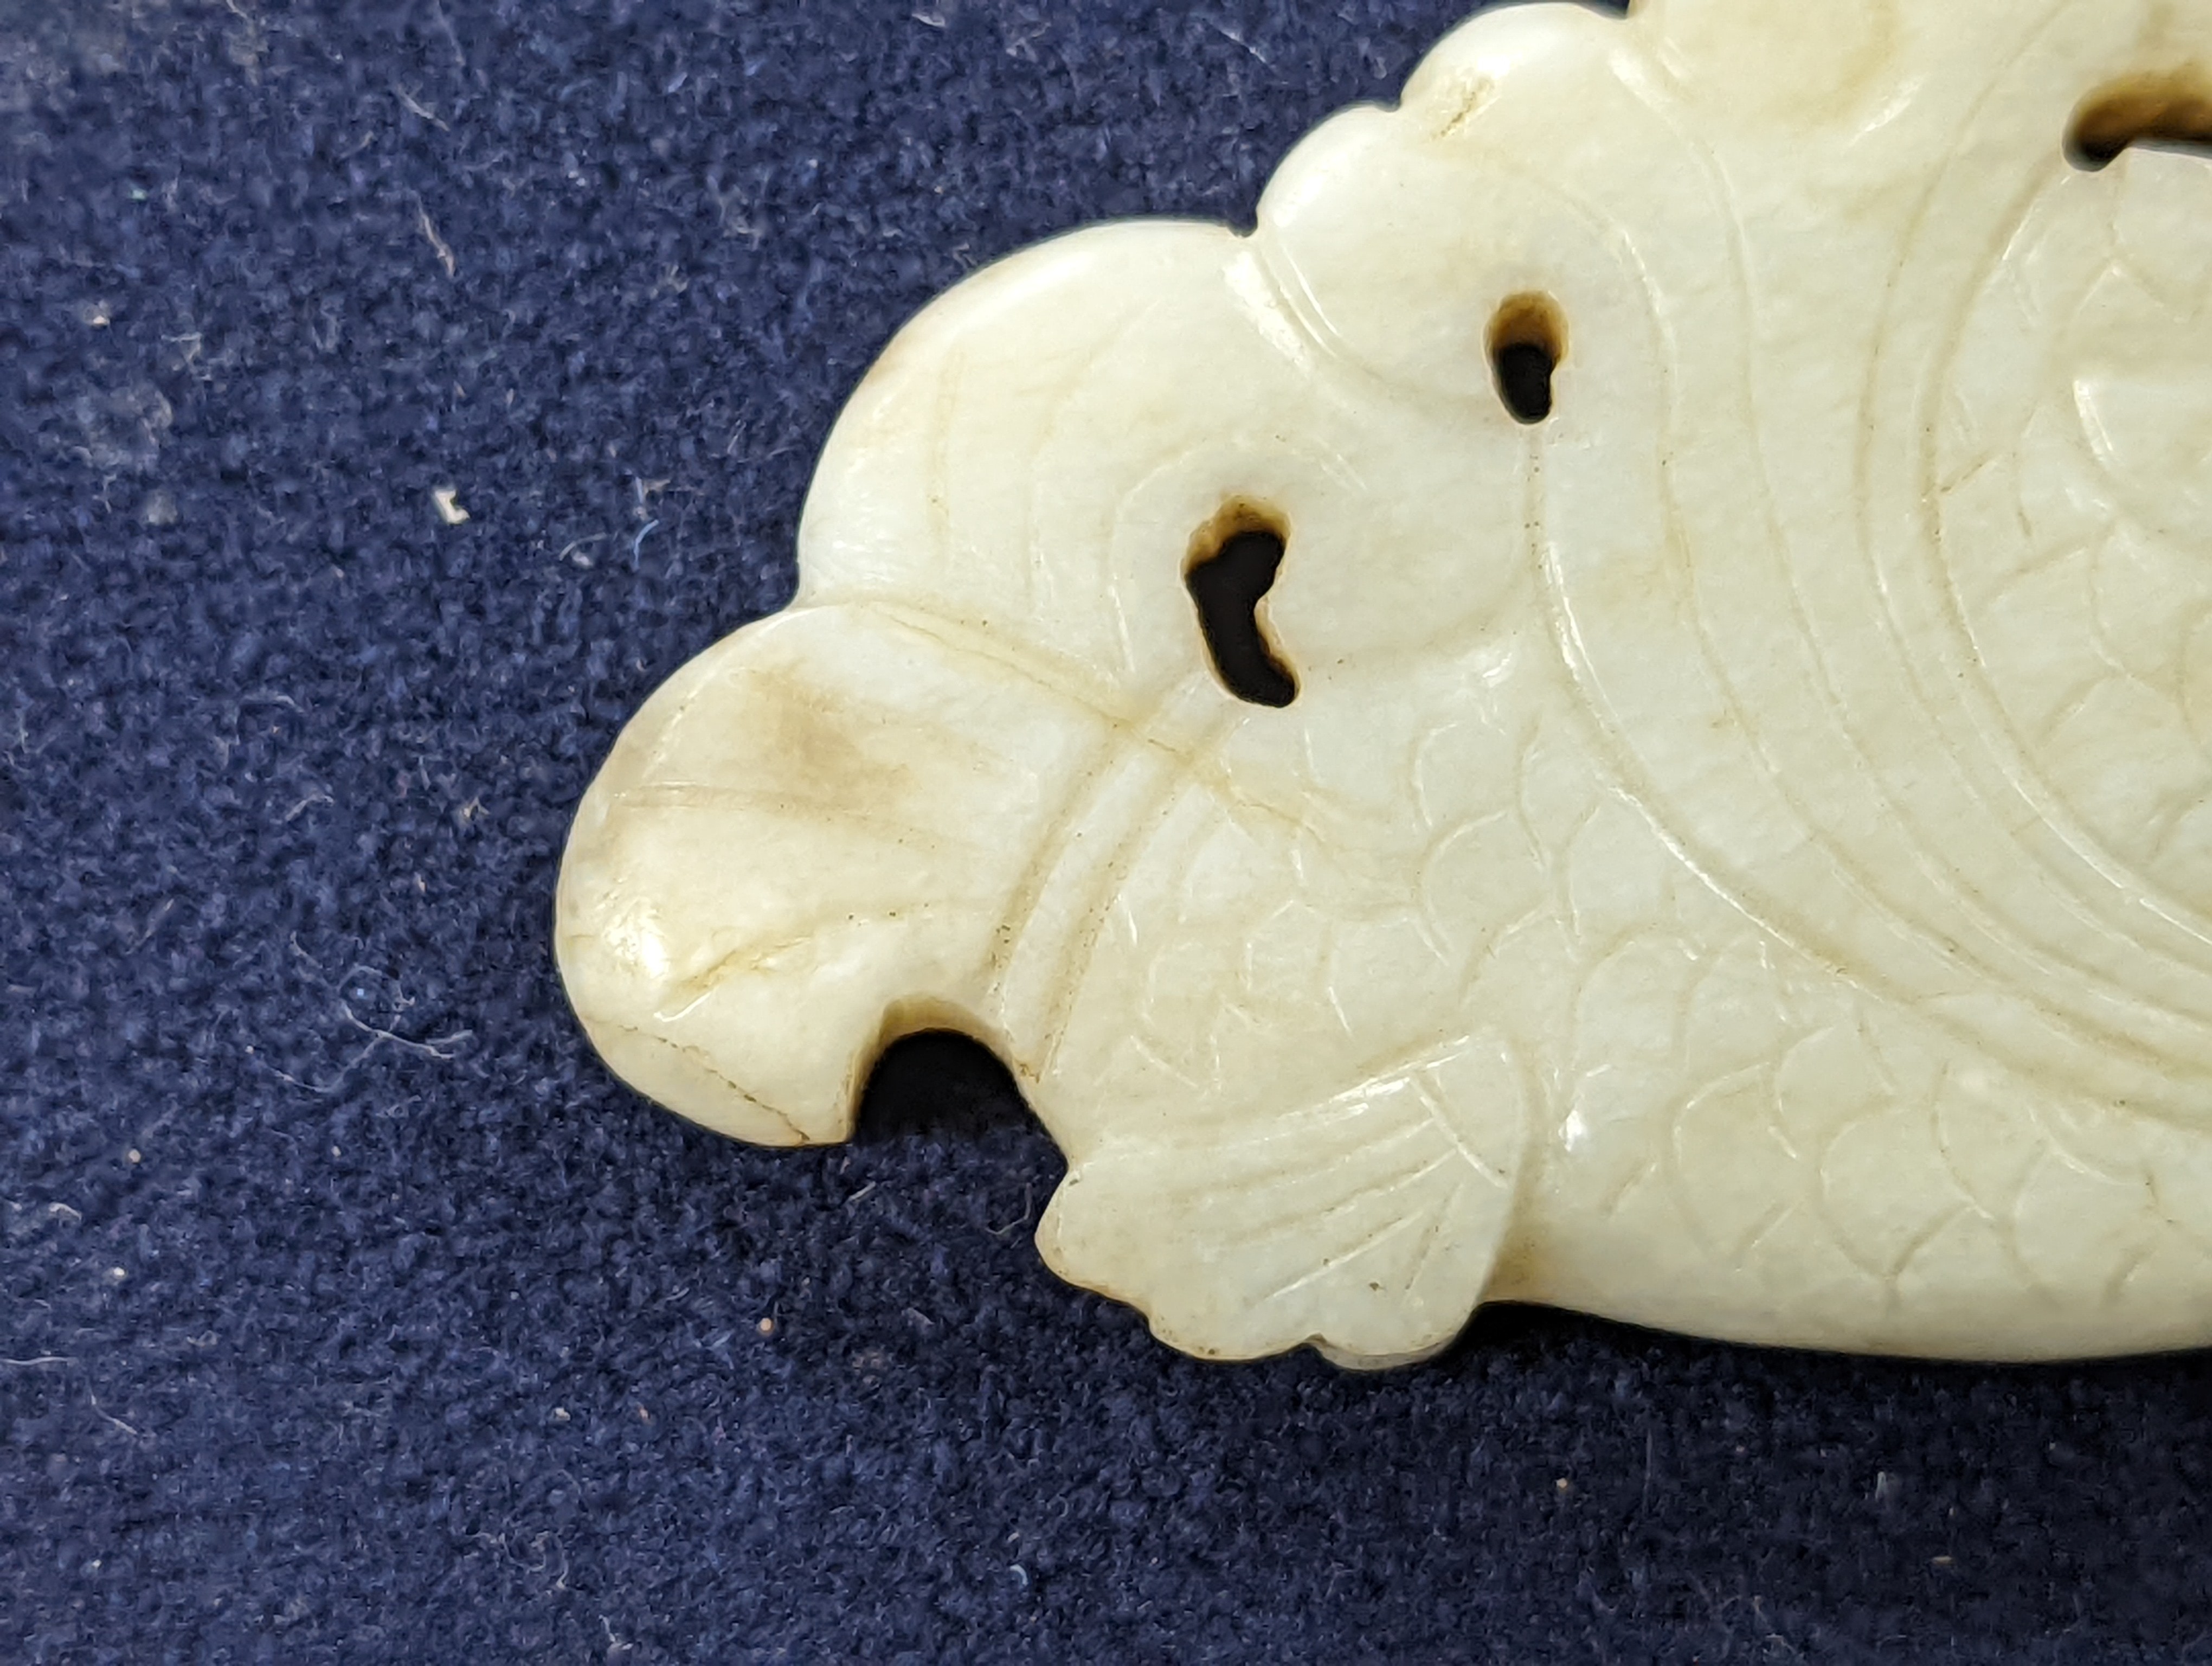 A Chinese white and black jade ‘dragon-fish’ plaque, 19th/20th century, 6cm